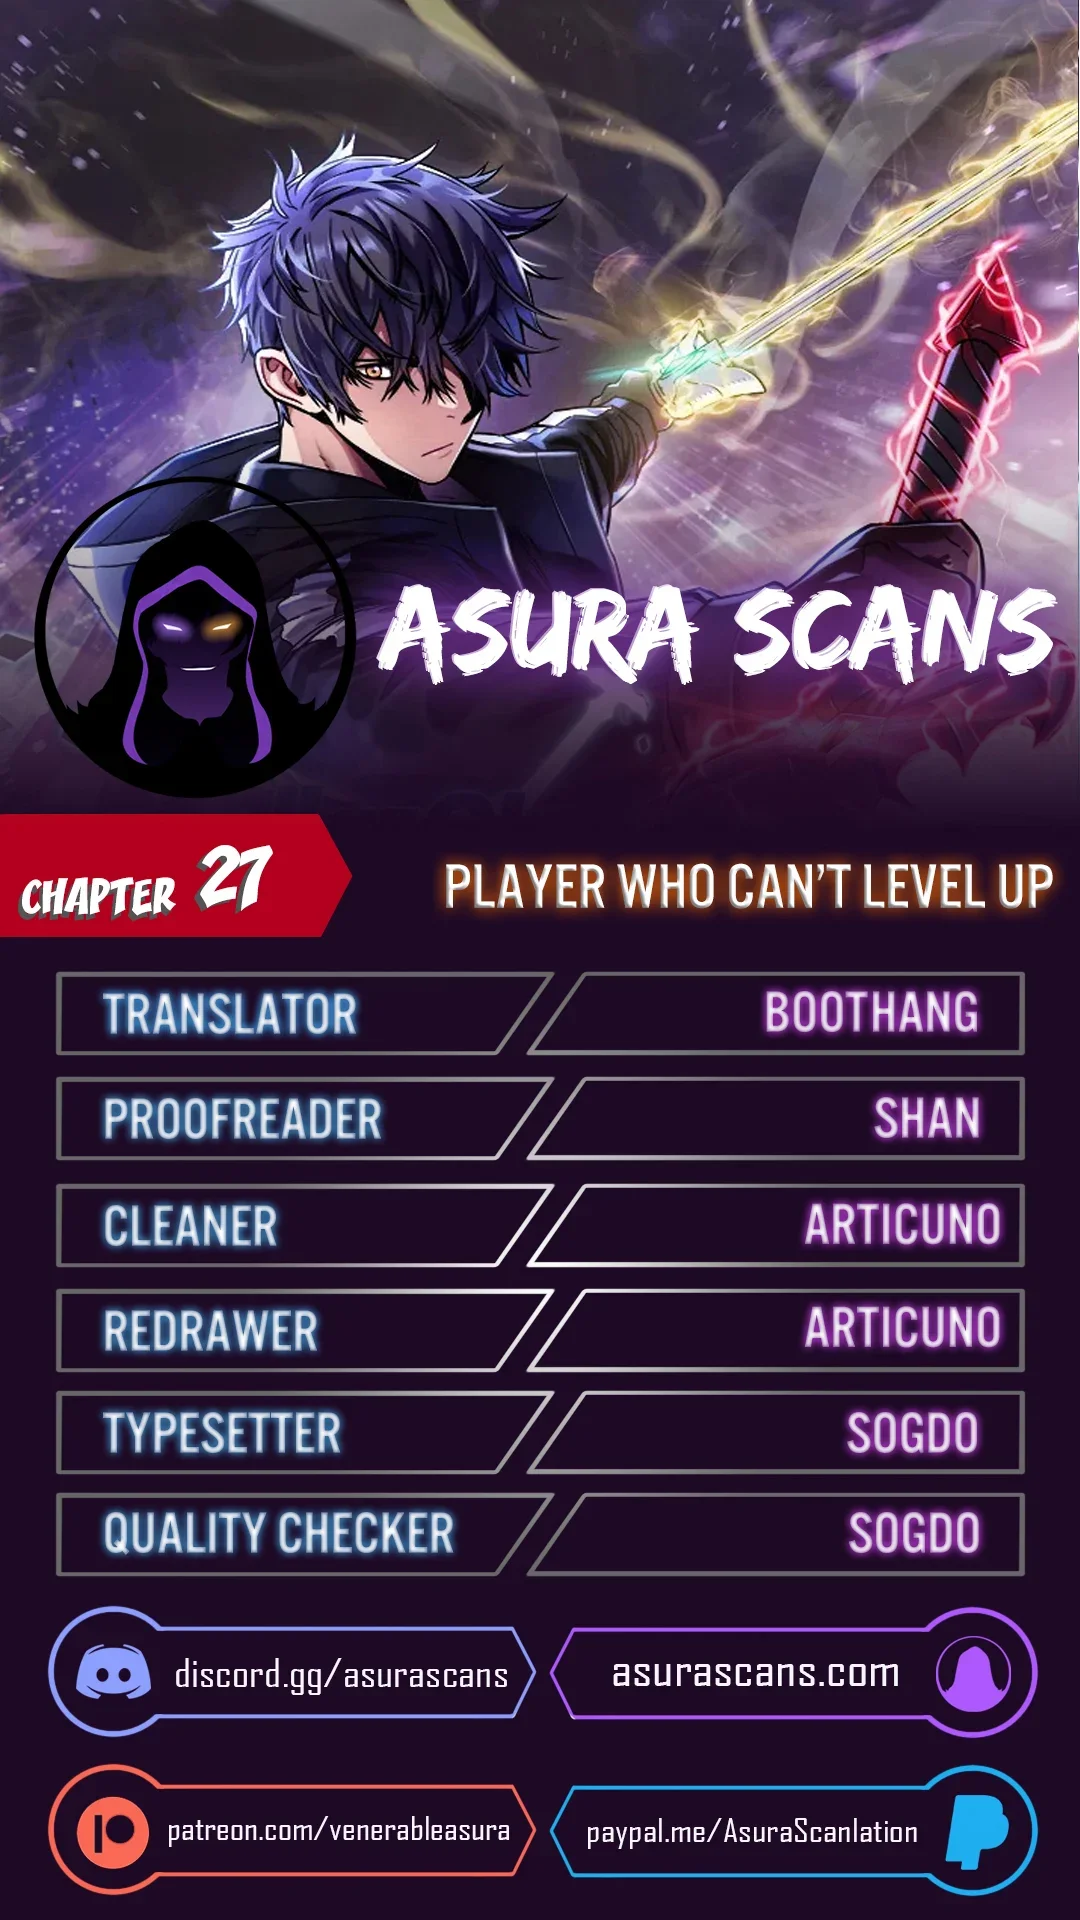 player-who-cant-level-up-chap-27-0